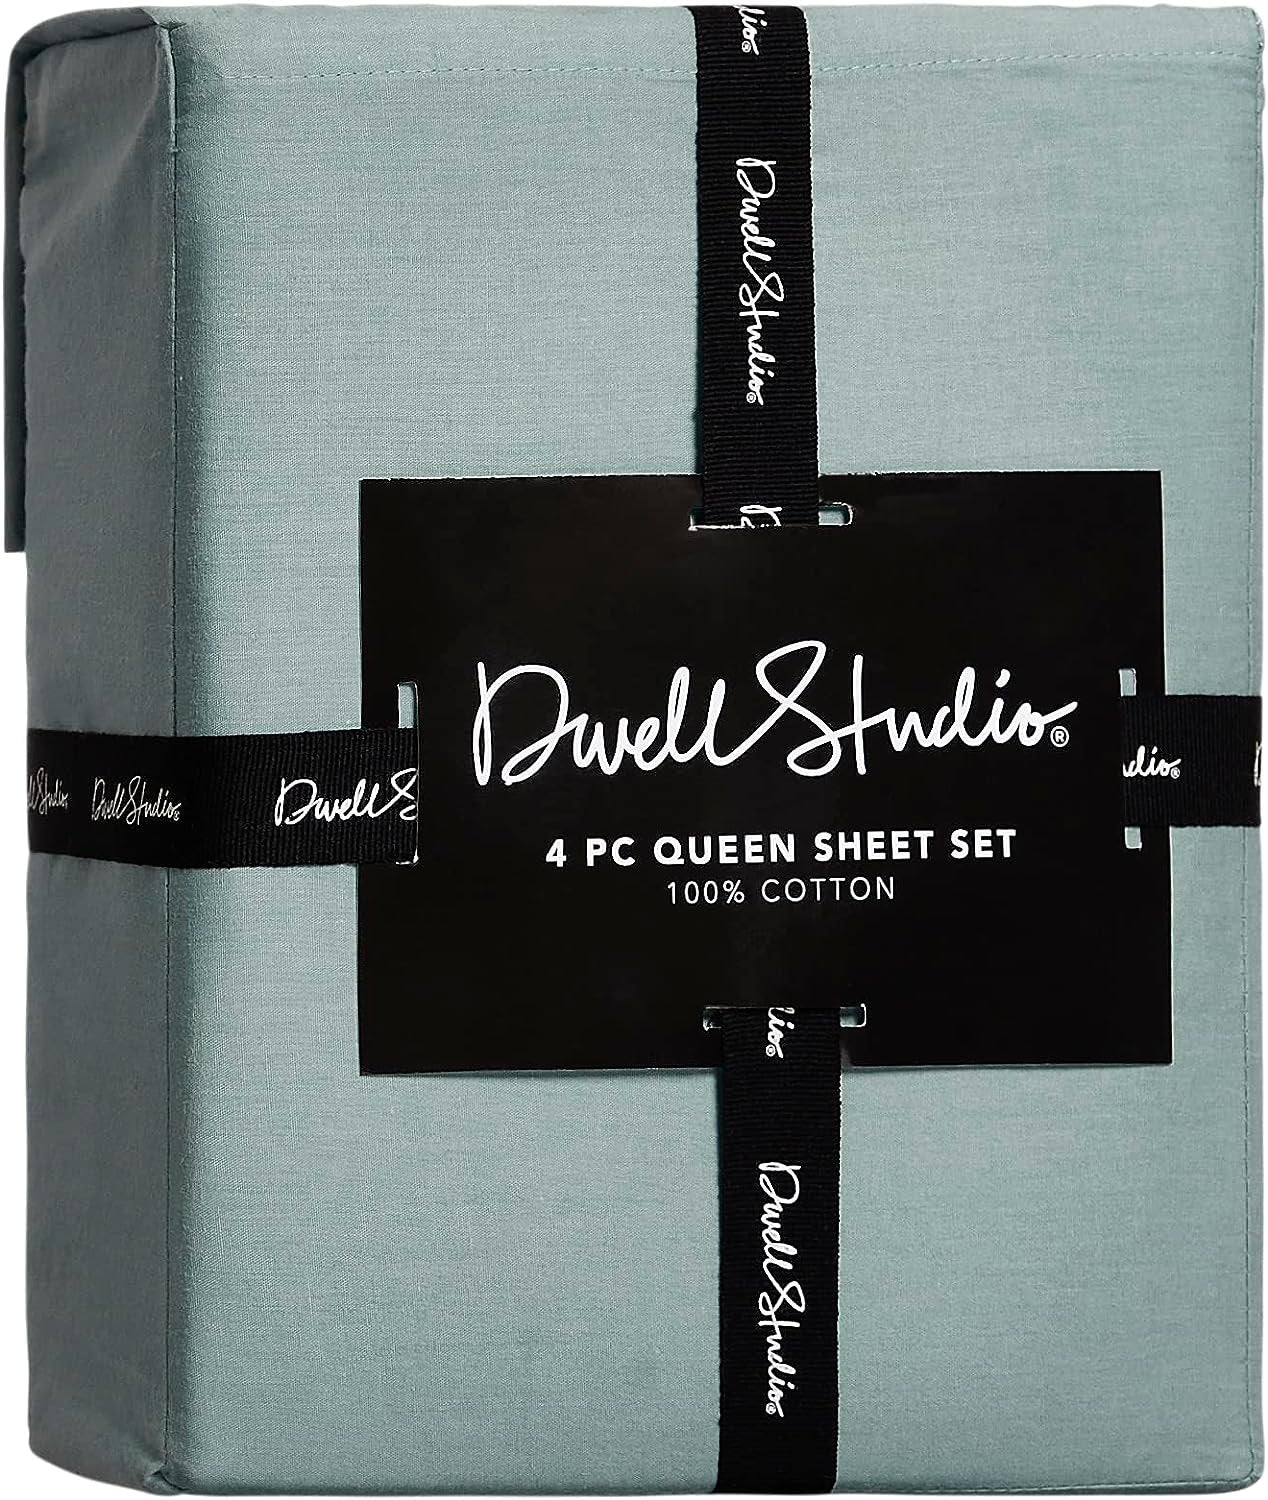 Dwell Studio 100% Cotton Percale Sheet Set - Deep Pocket, 4 Piece - 1 Flat, 1 Deep Pocket Fitted Sheet and 2 Pillowcases, Crisp Cool and Strong Bed Linen (Queen,White)